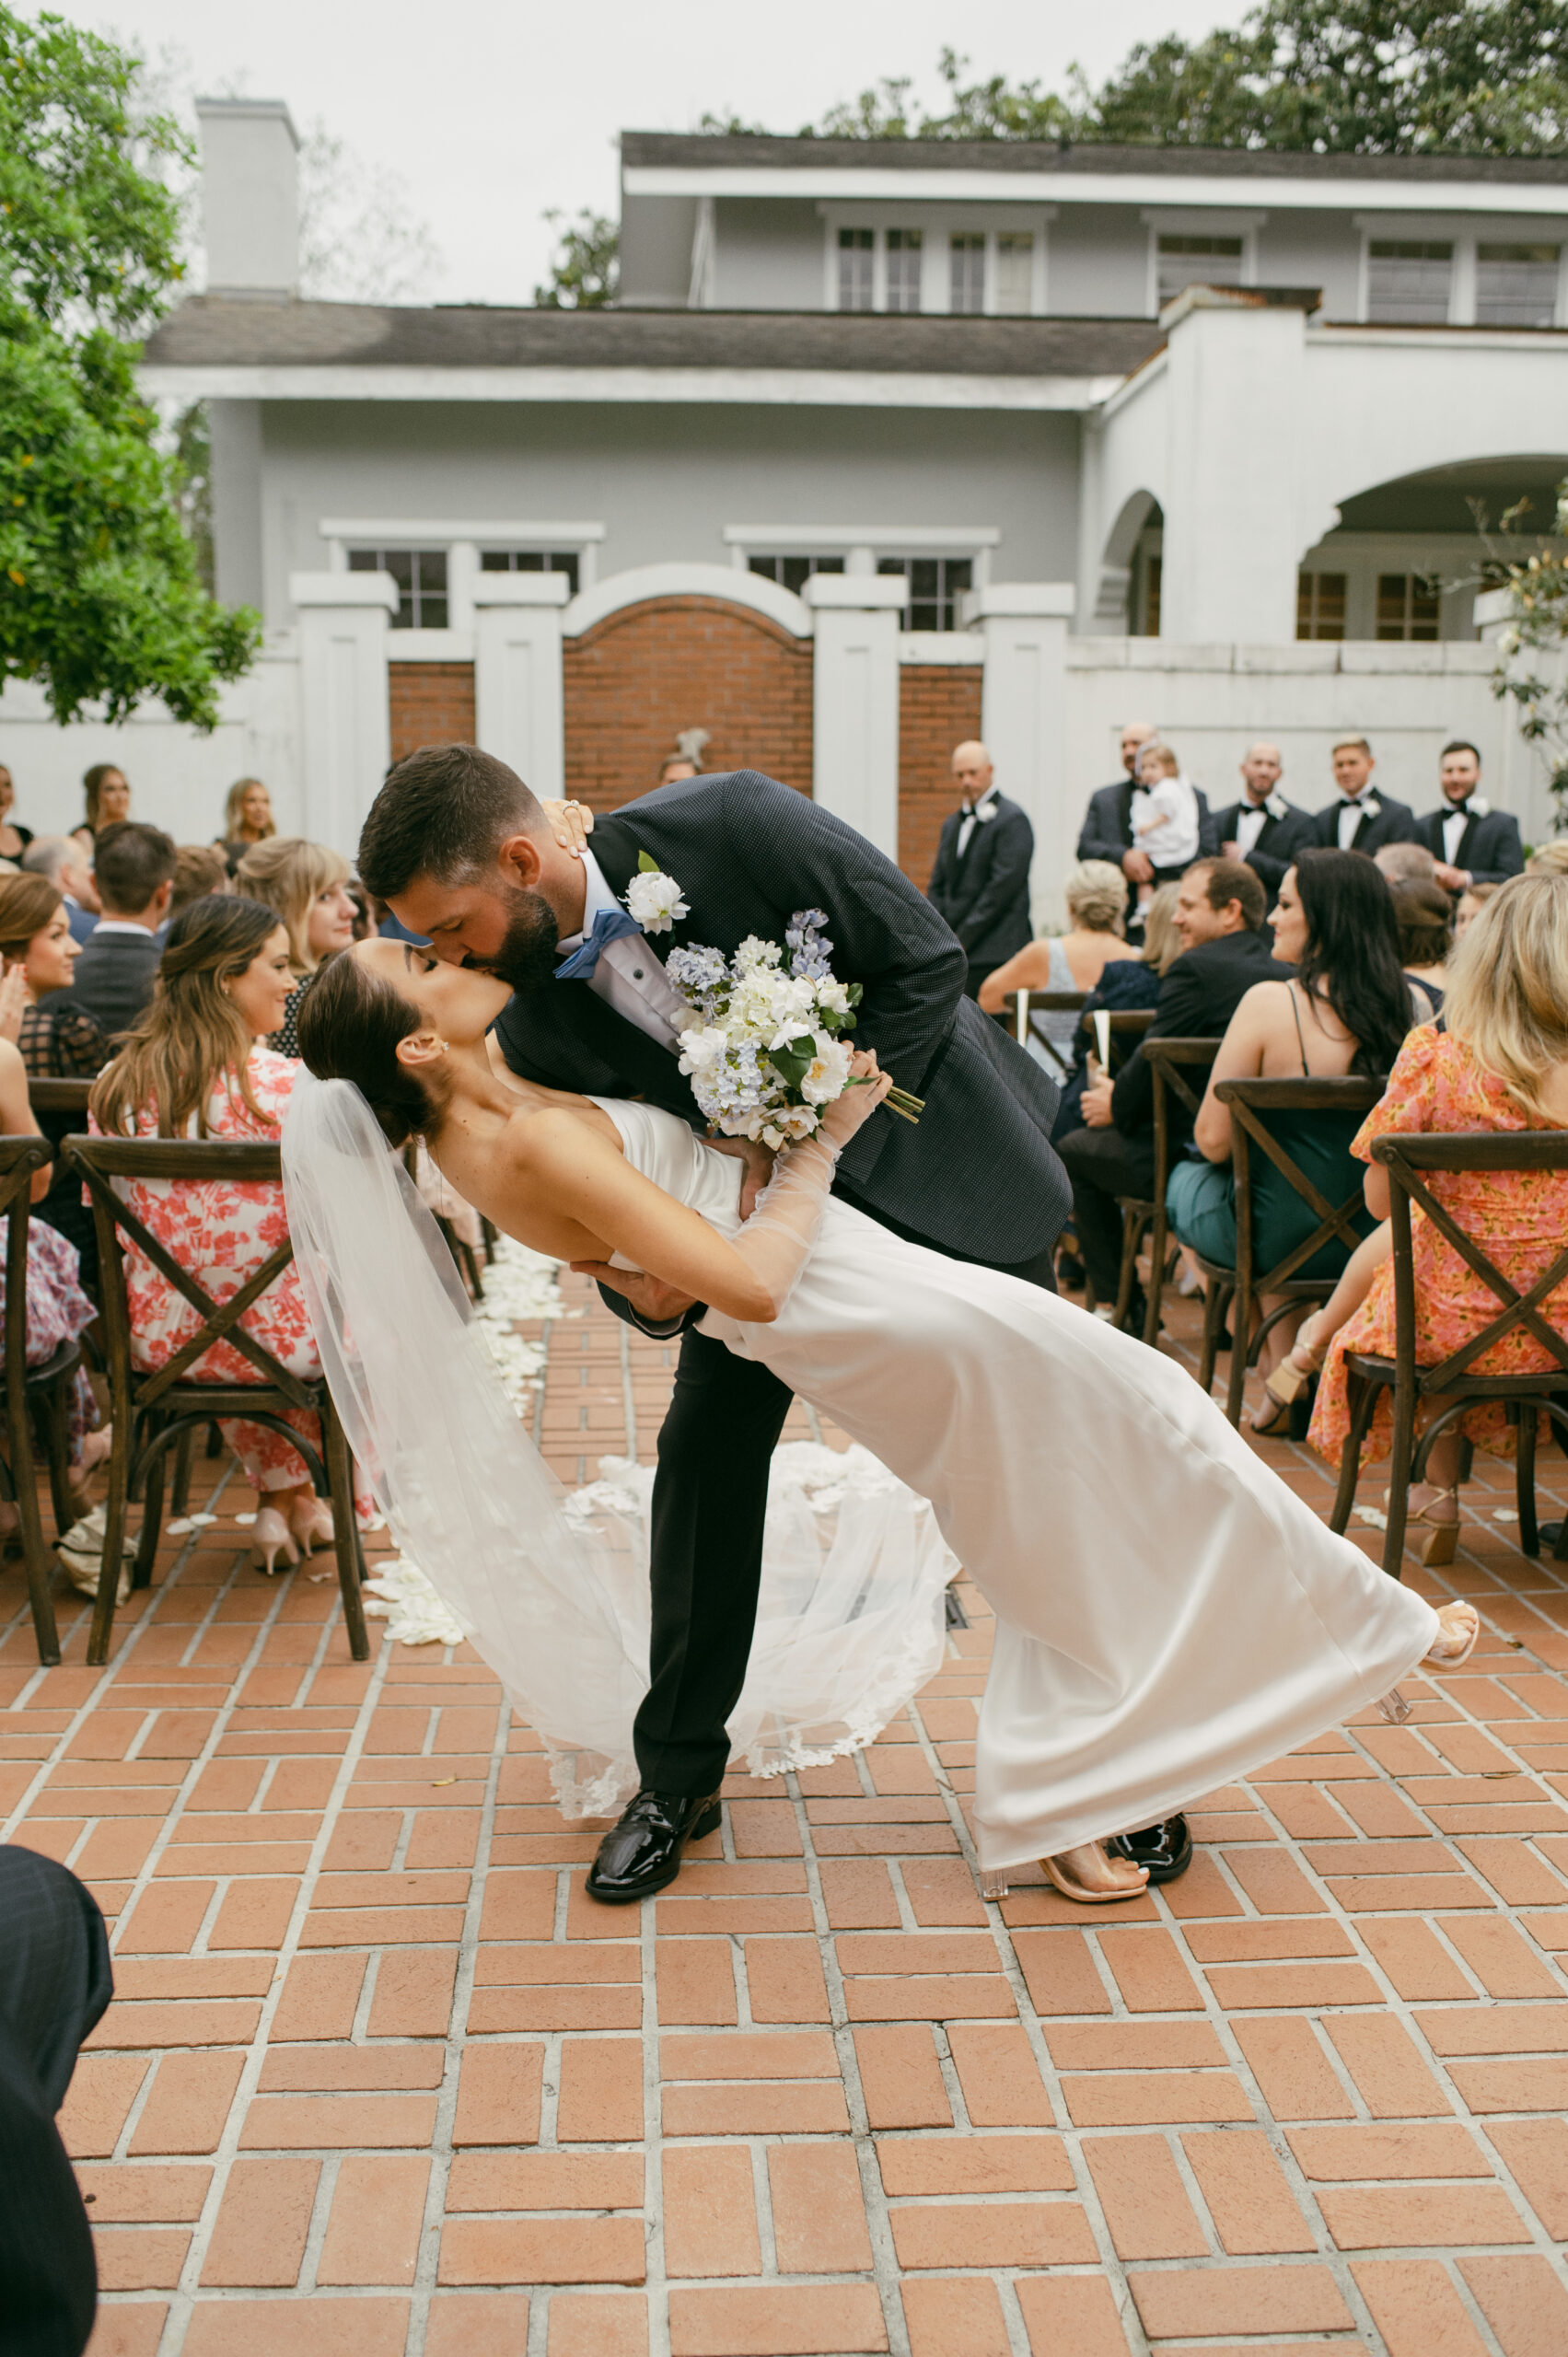 A bride and groom dip-kissing at the end of their ceremony at the Old Governor's Mansion in Baton Rouge, Louisiana.